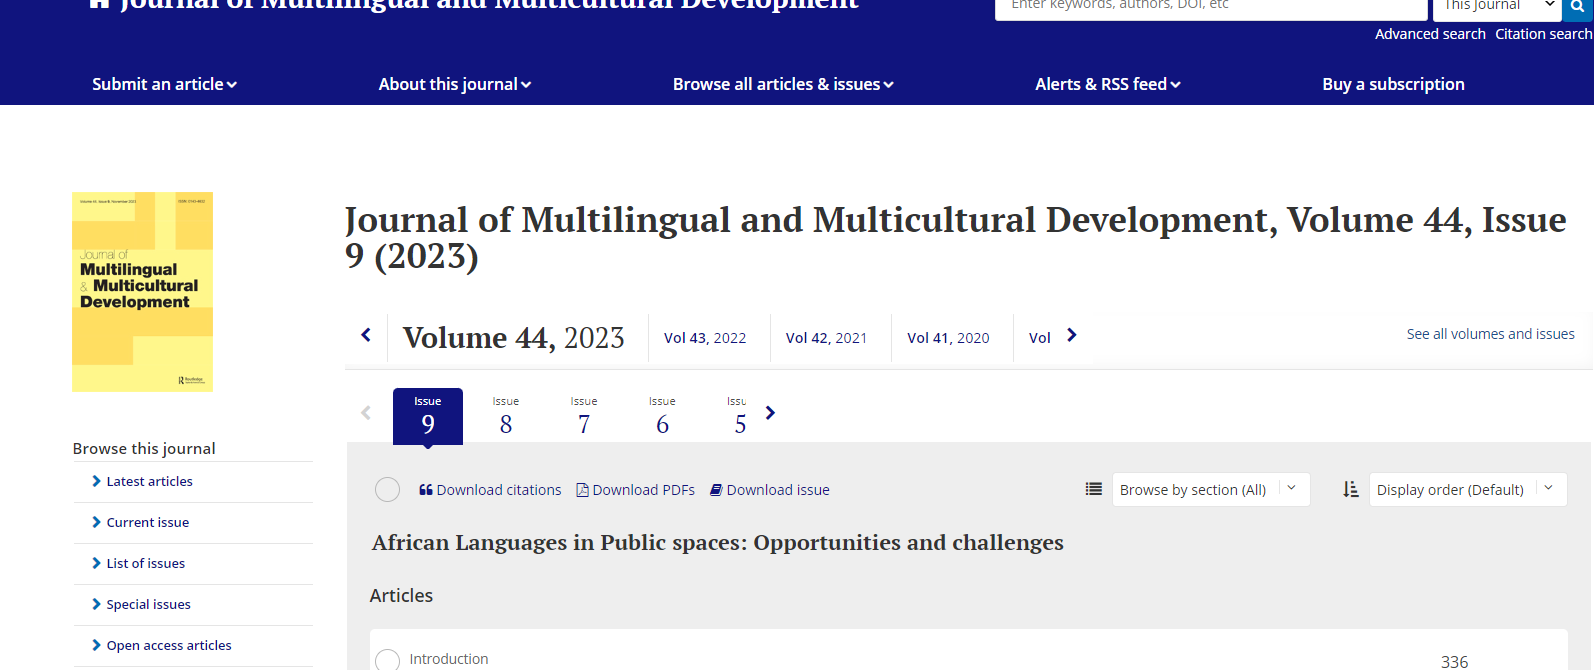 Journal of Multilingual and Multicultural Development